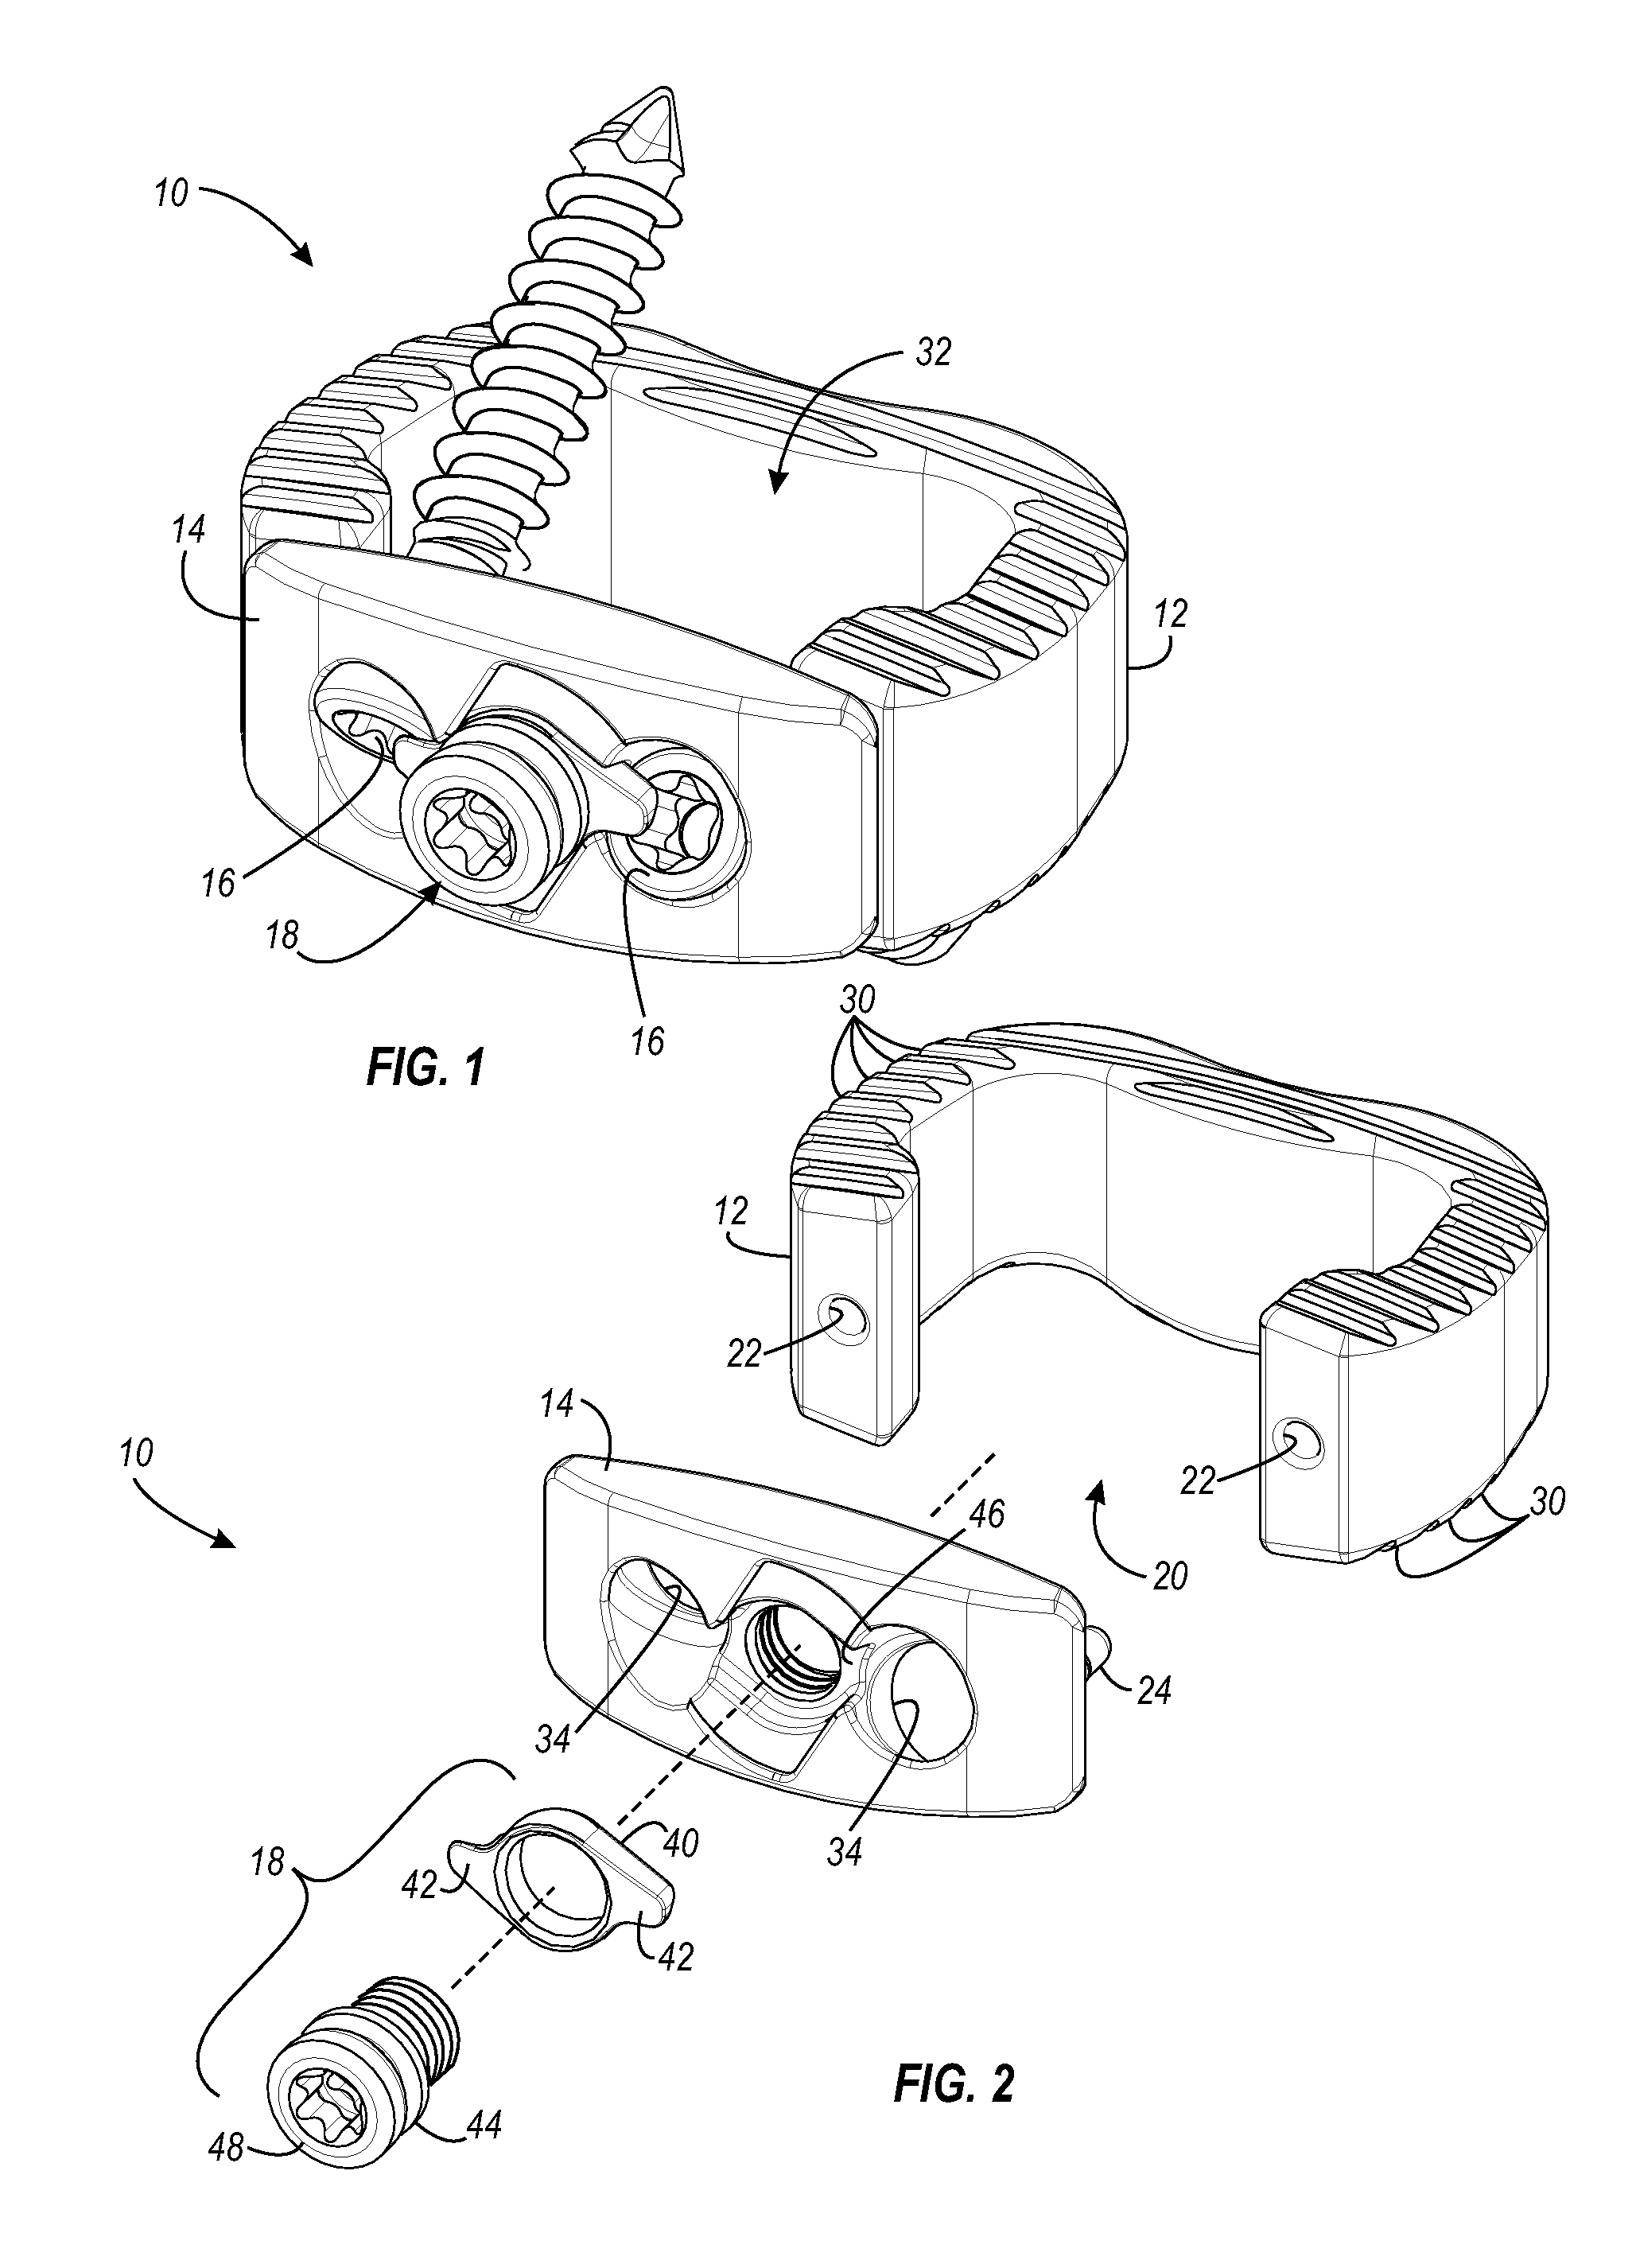 Interbody fusion device, integral retention device, and associated methods